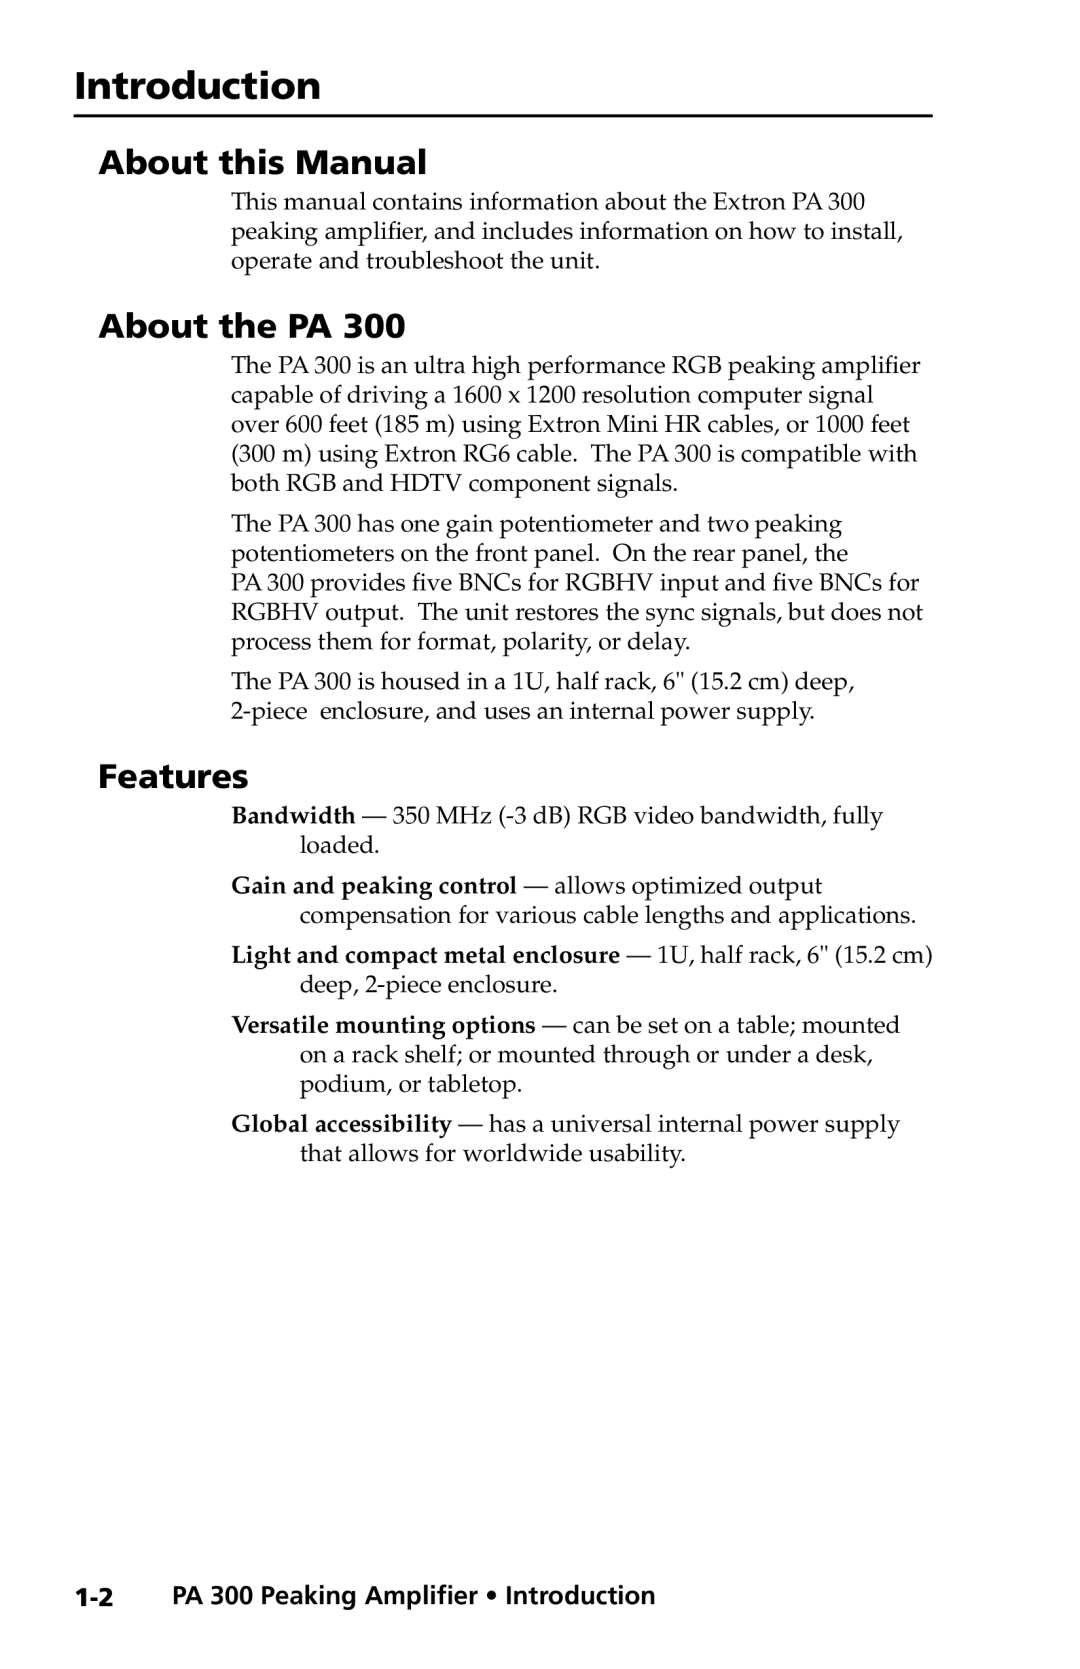 Extron electronic user manual About this Manual, About the PA, Features, 1-2PA 300 Peaking Amplifier Introduction 